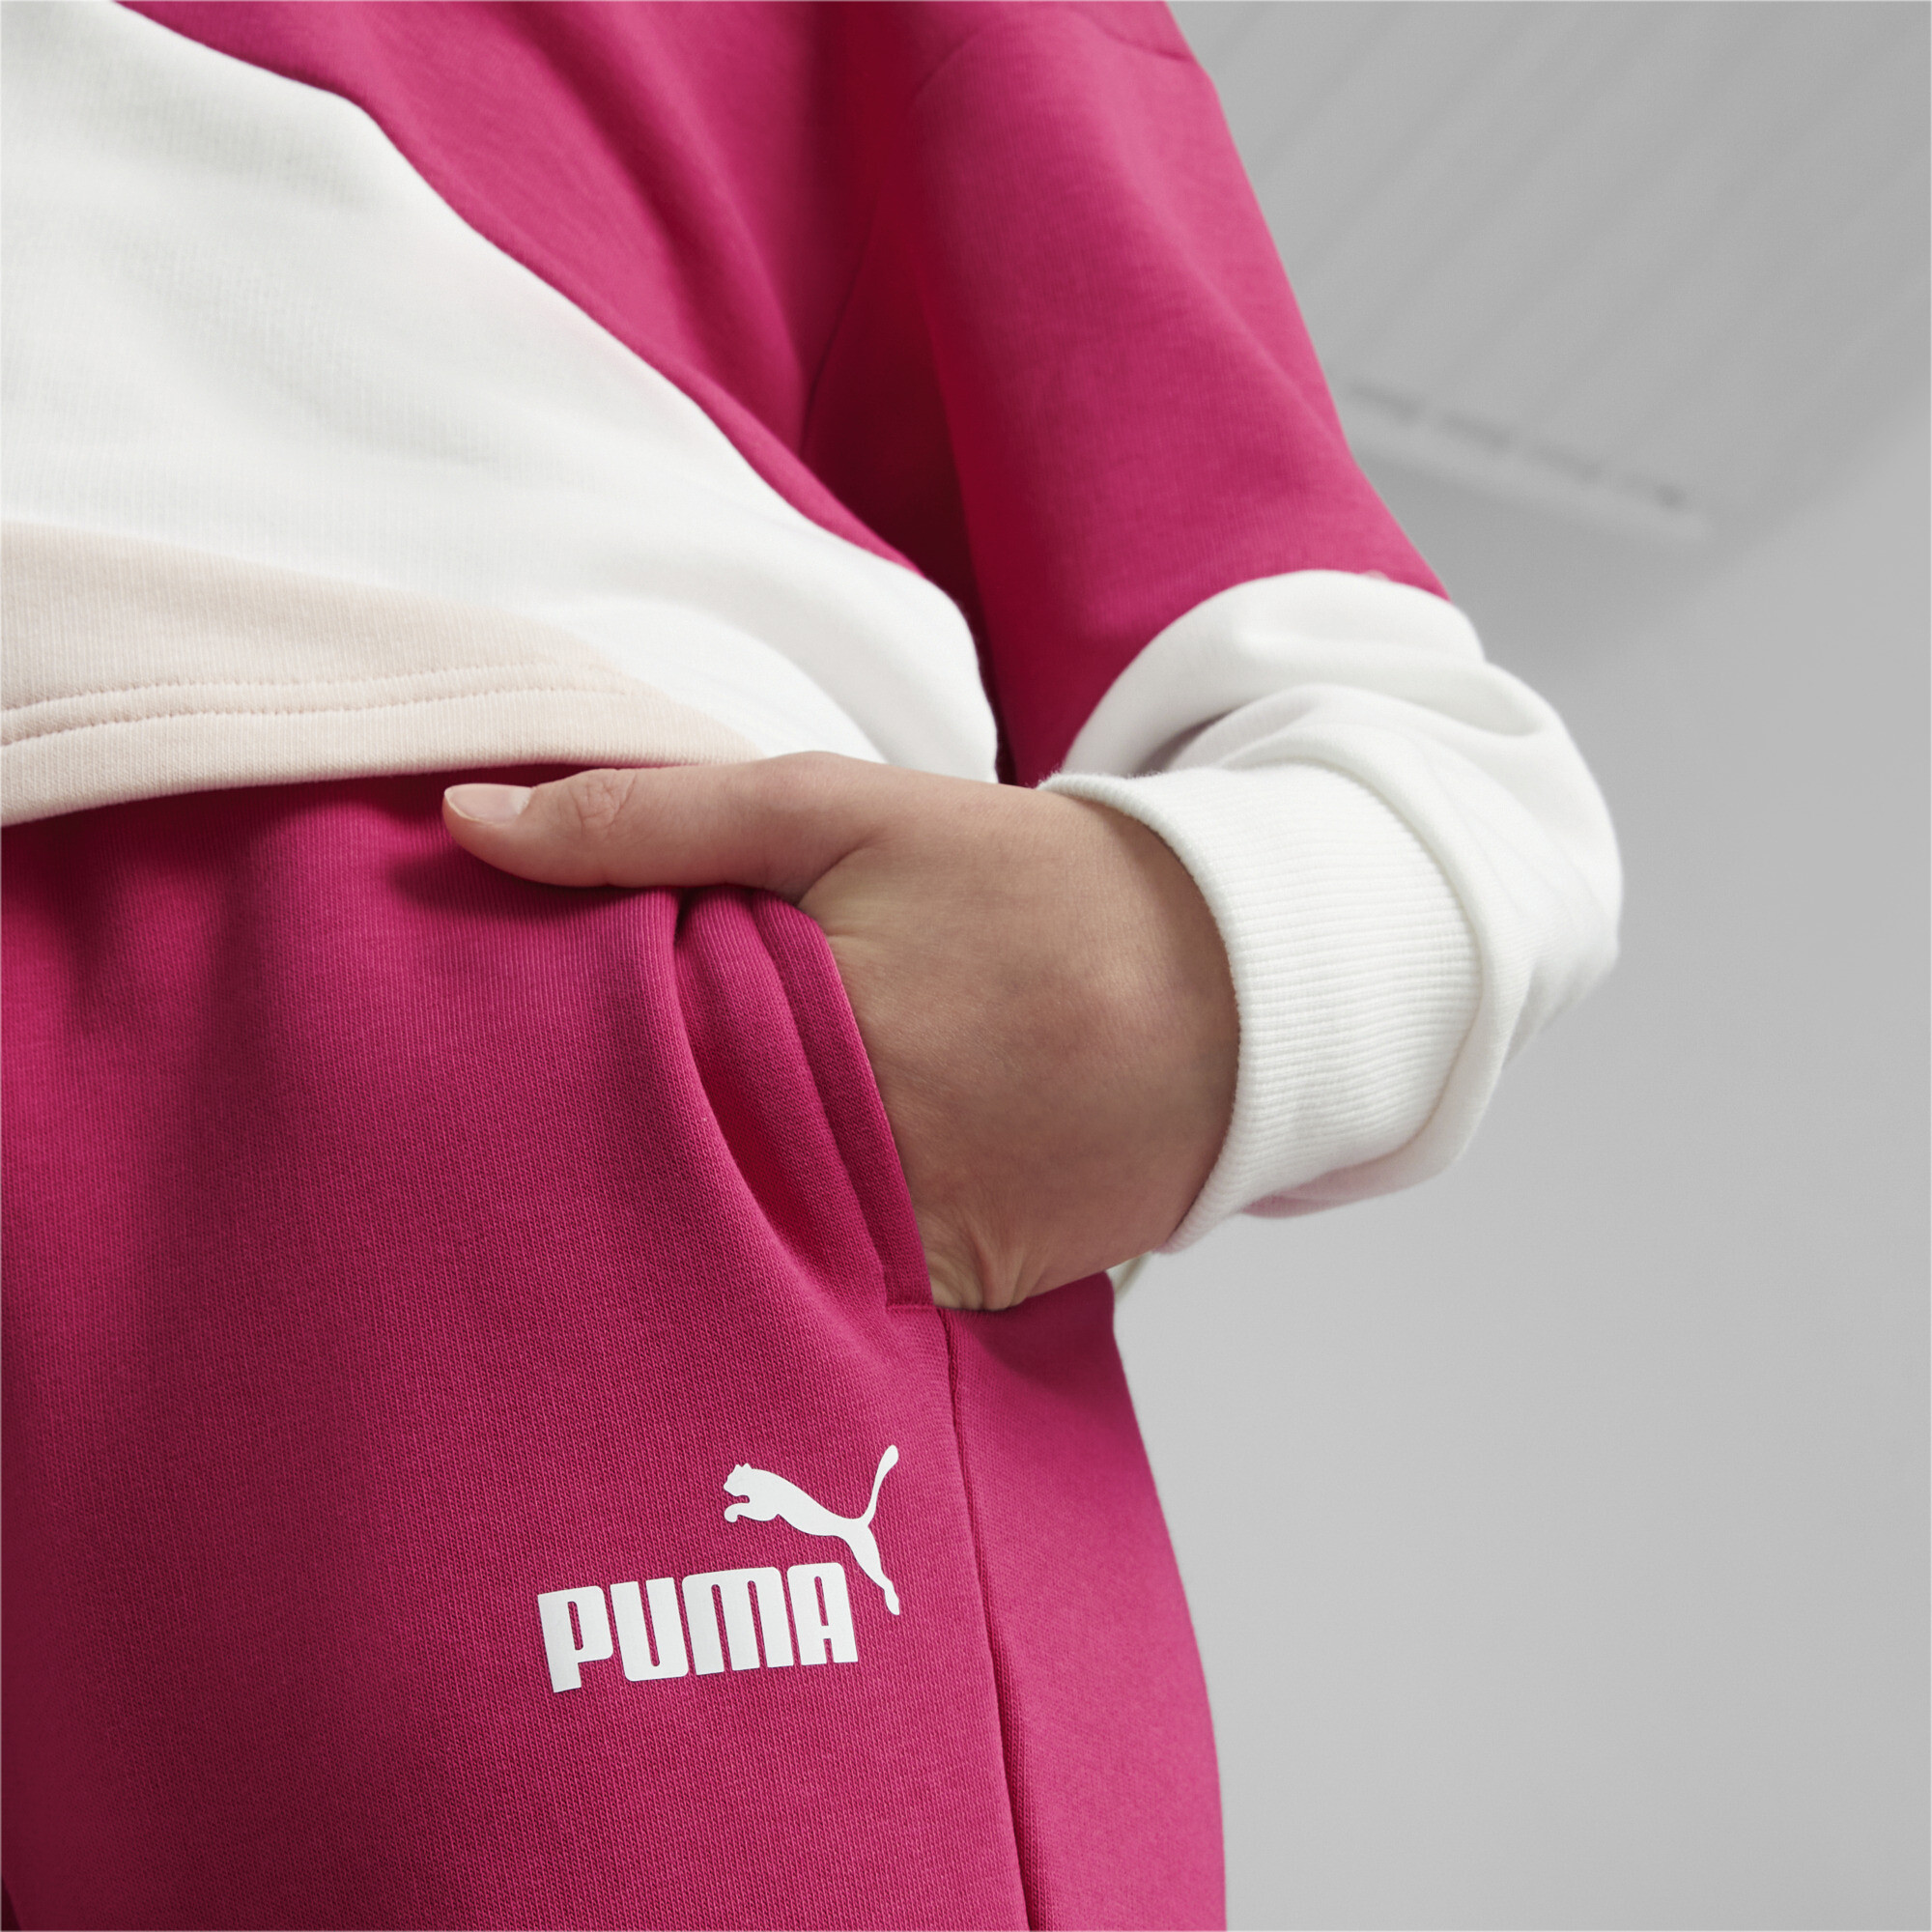 PUMA POWER Cat Pants In Pink, Size 5-6 Youth